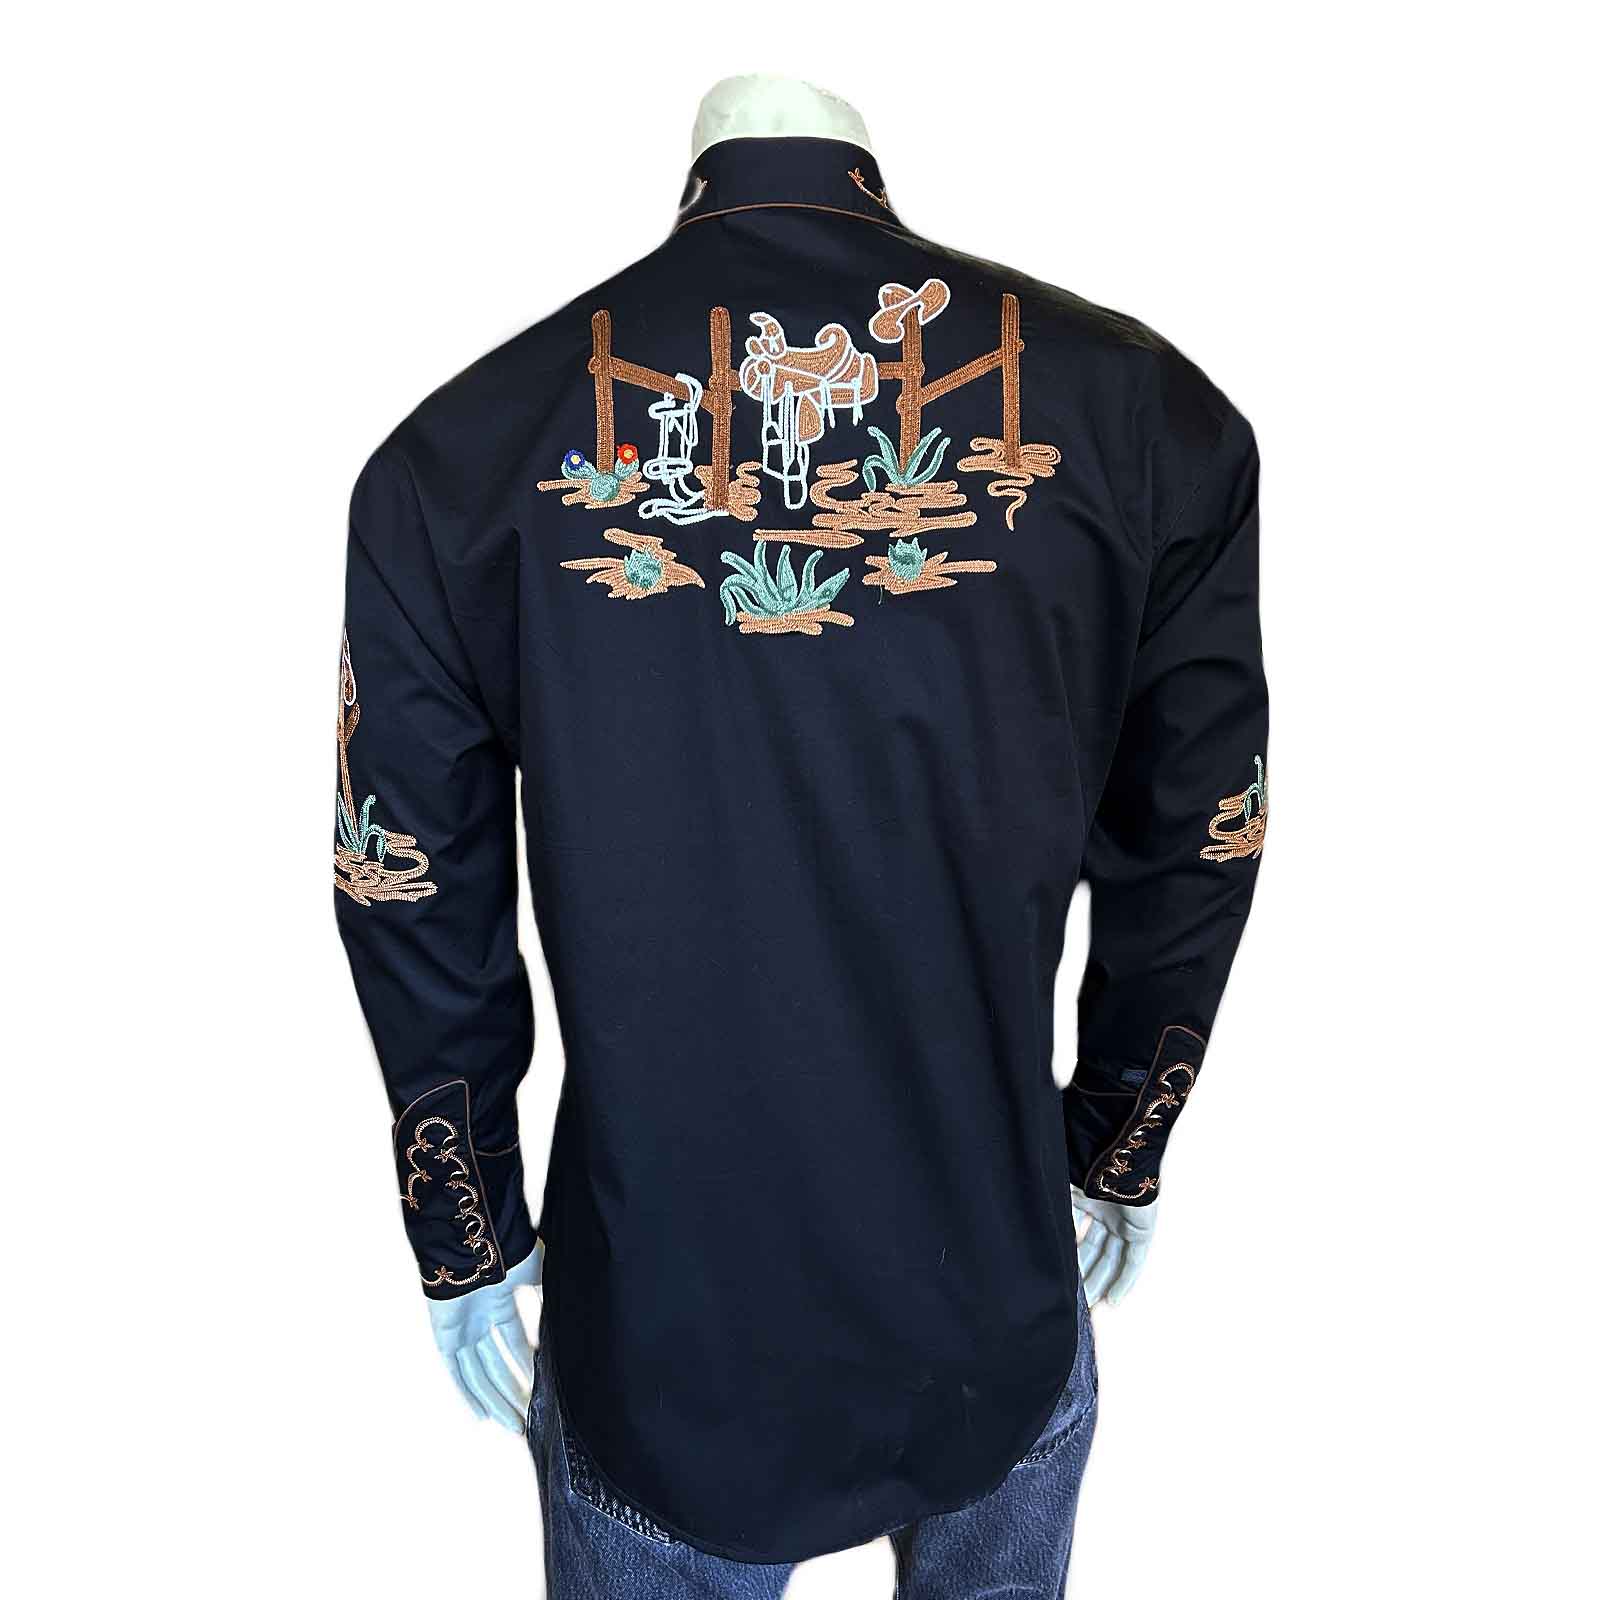 Men's Cactus u0026 Cowboy Boots Embroidered Western Shirt in Black